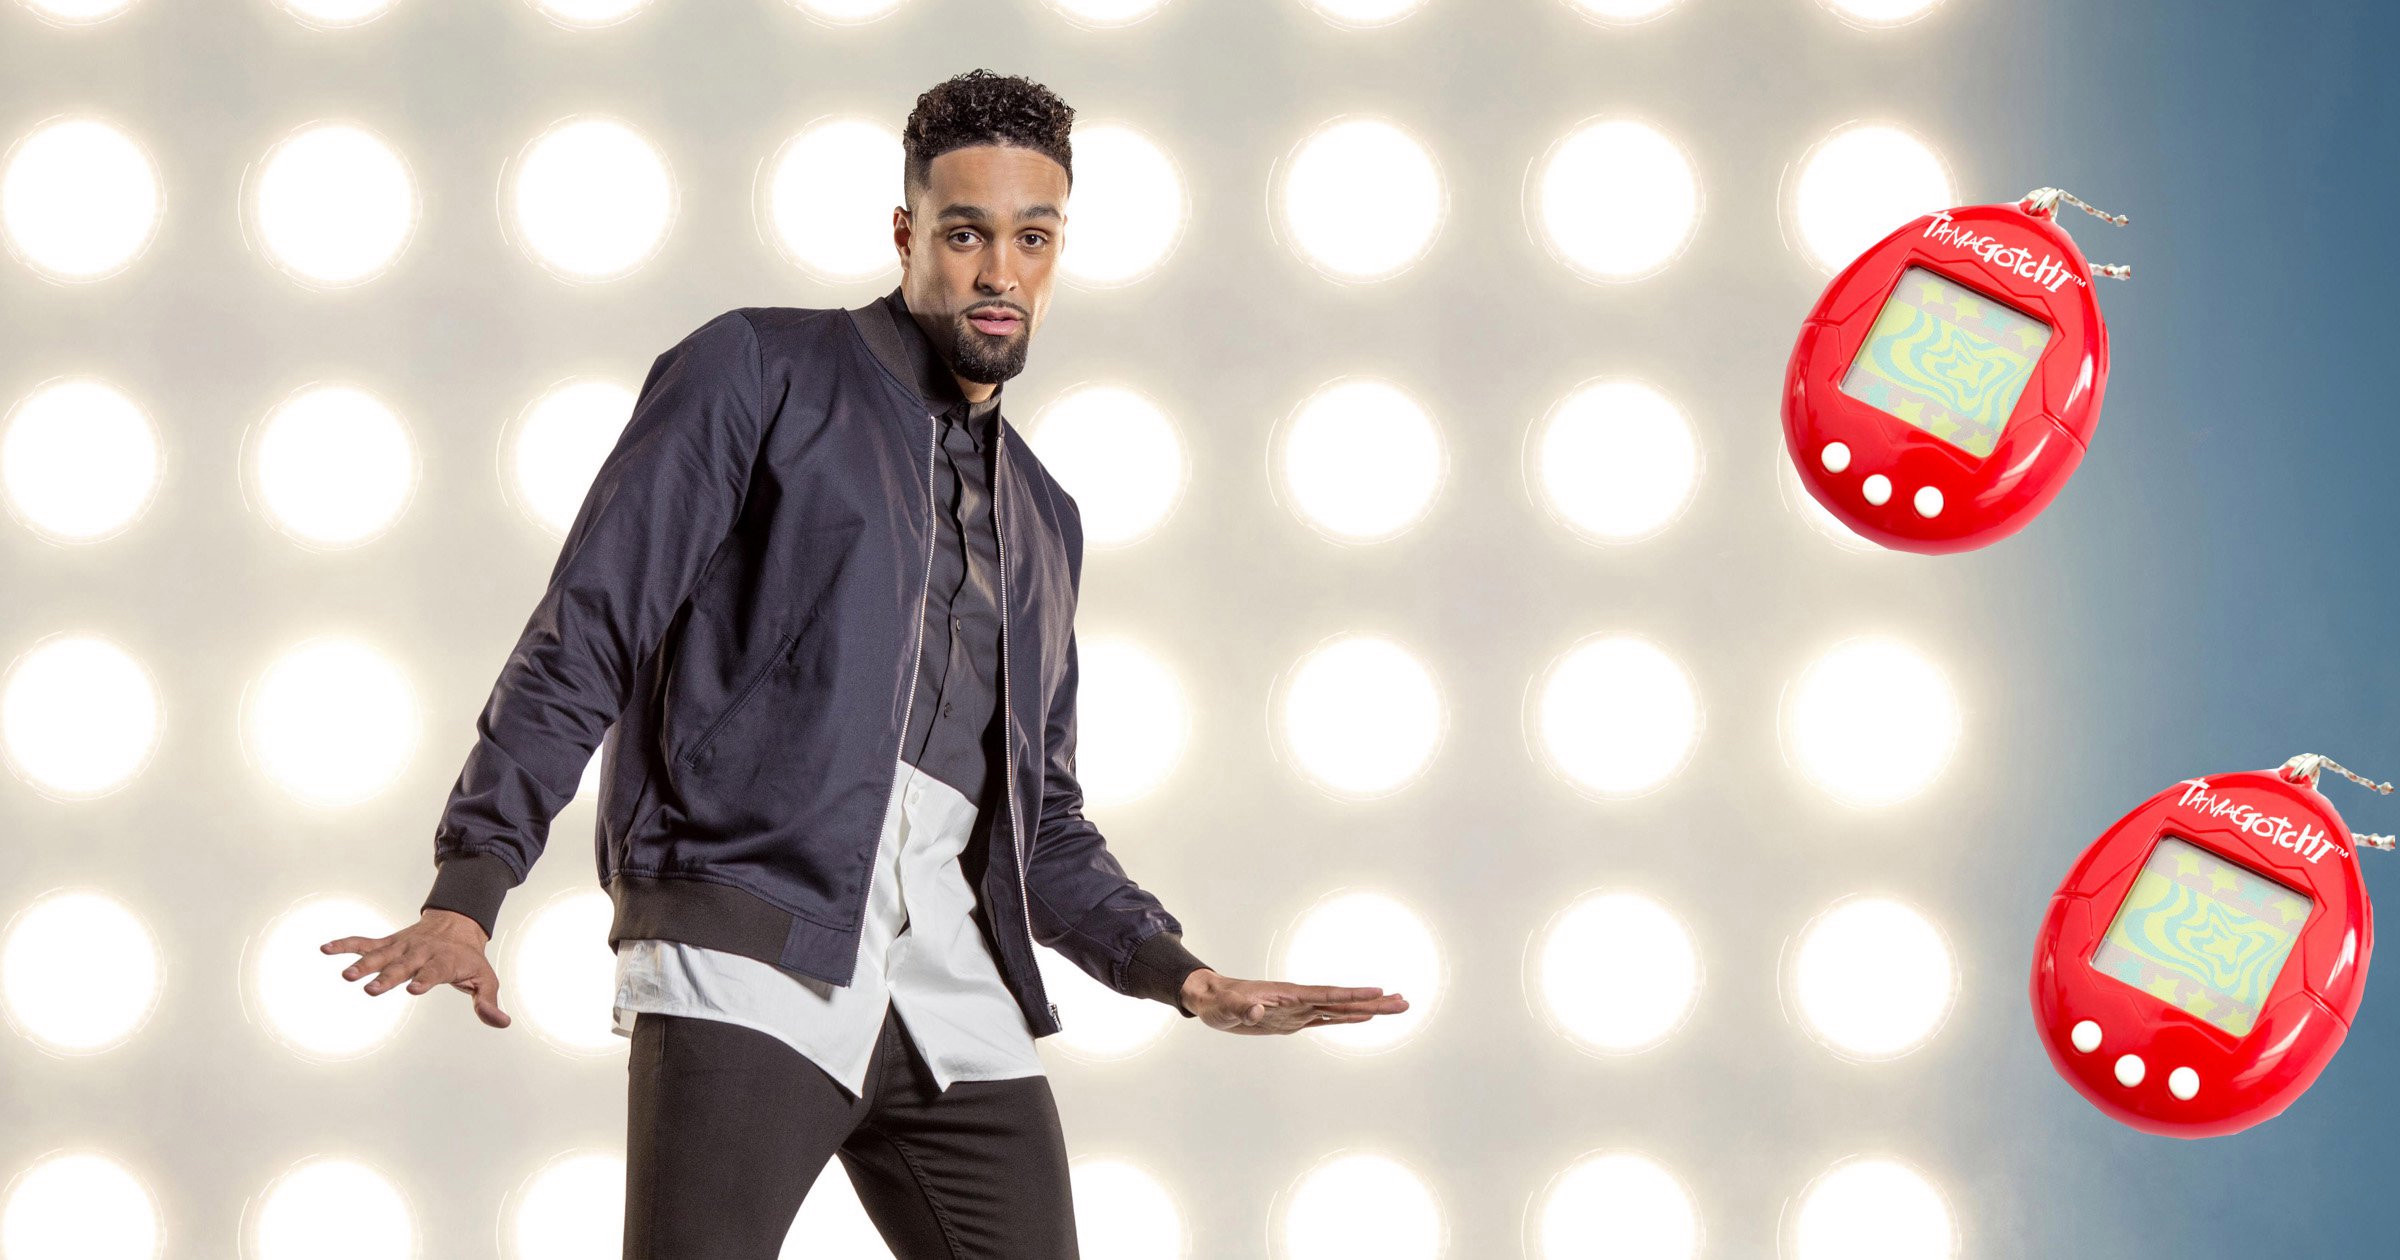 Ashley Banjo on his Tamagotchis obsession and TikTok dancing